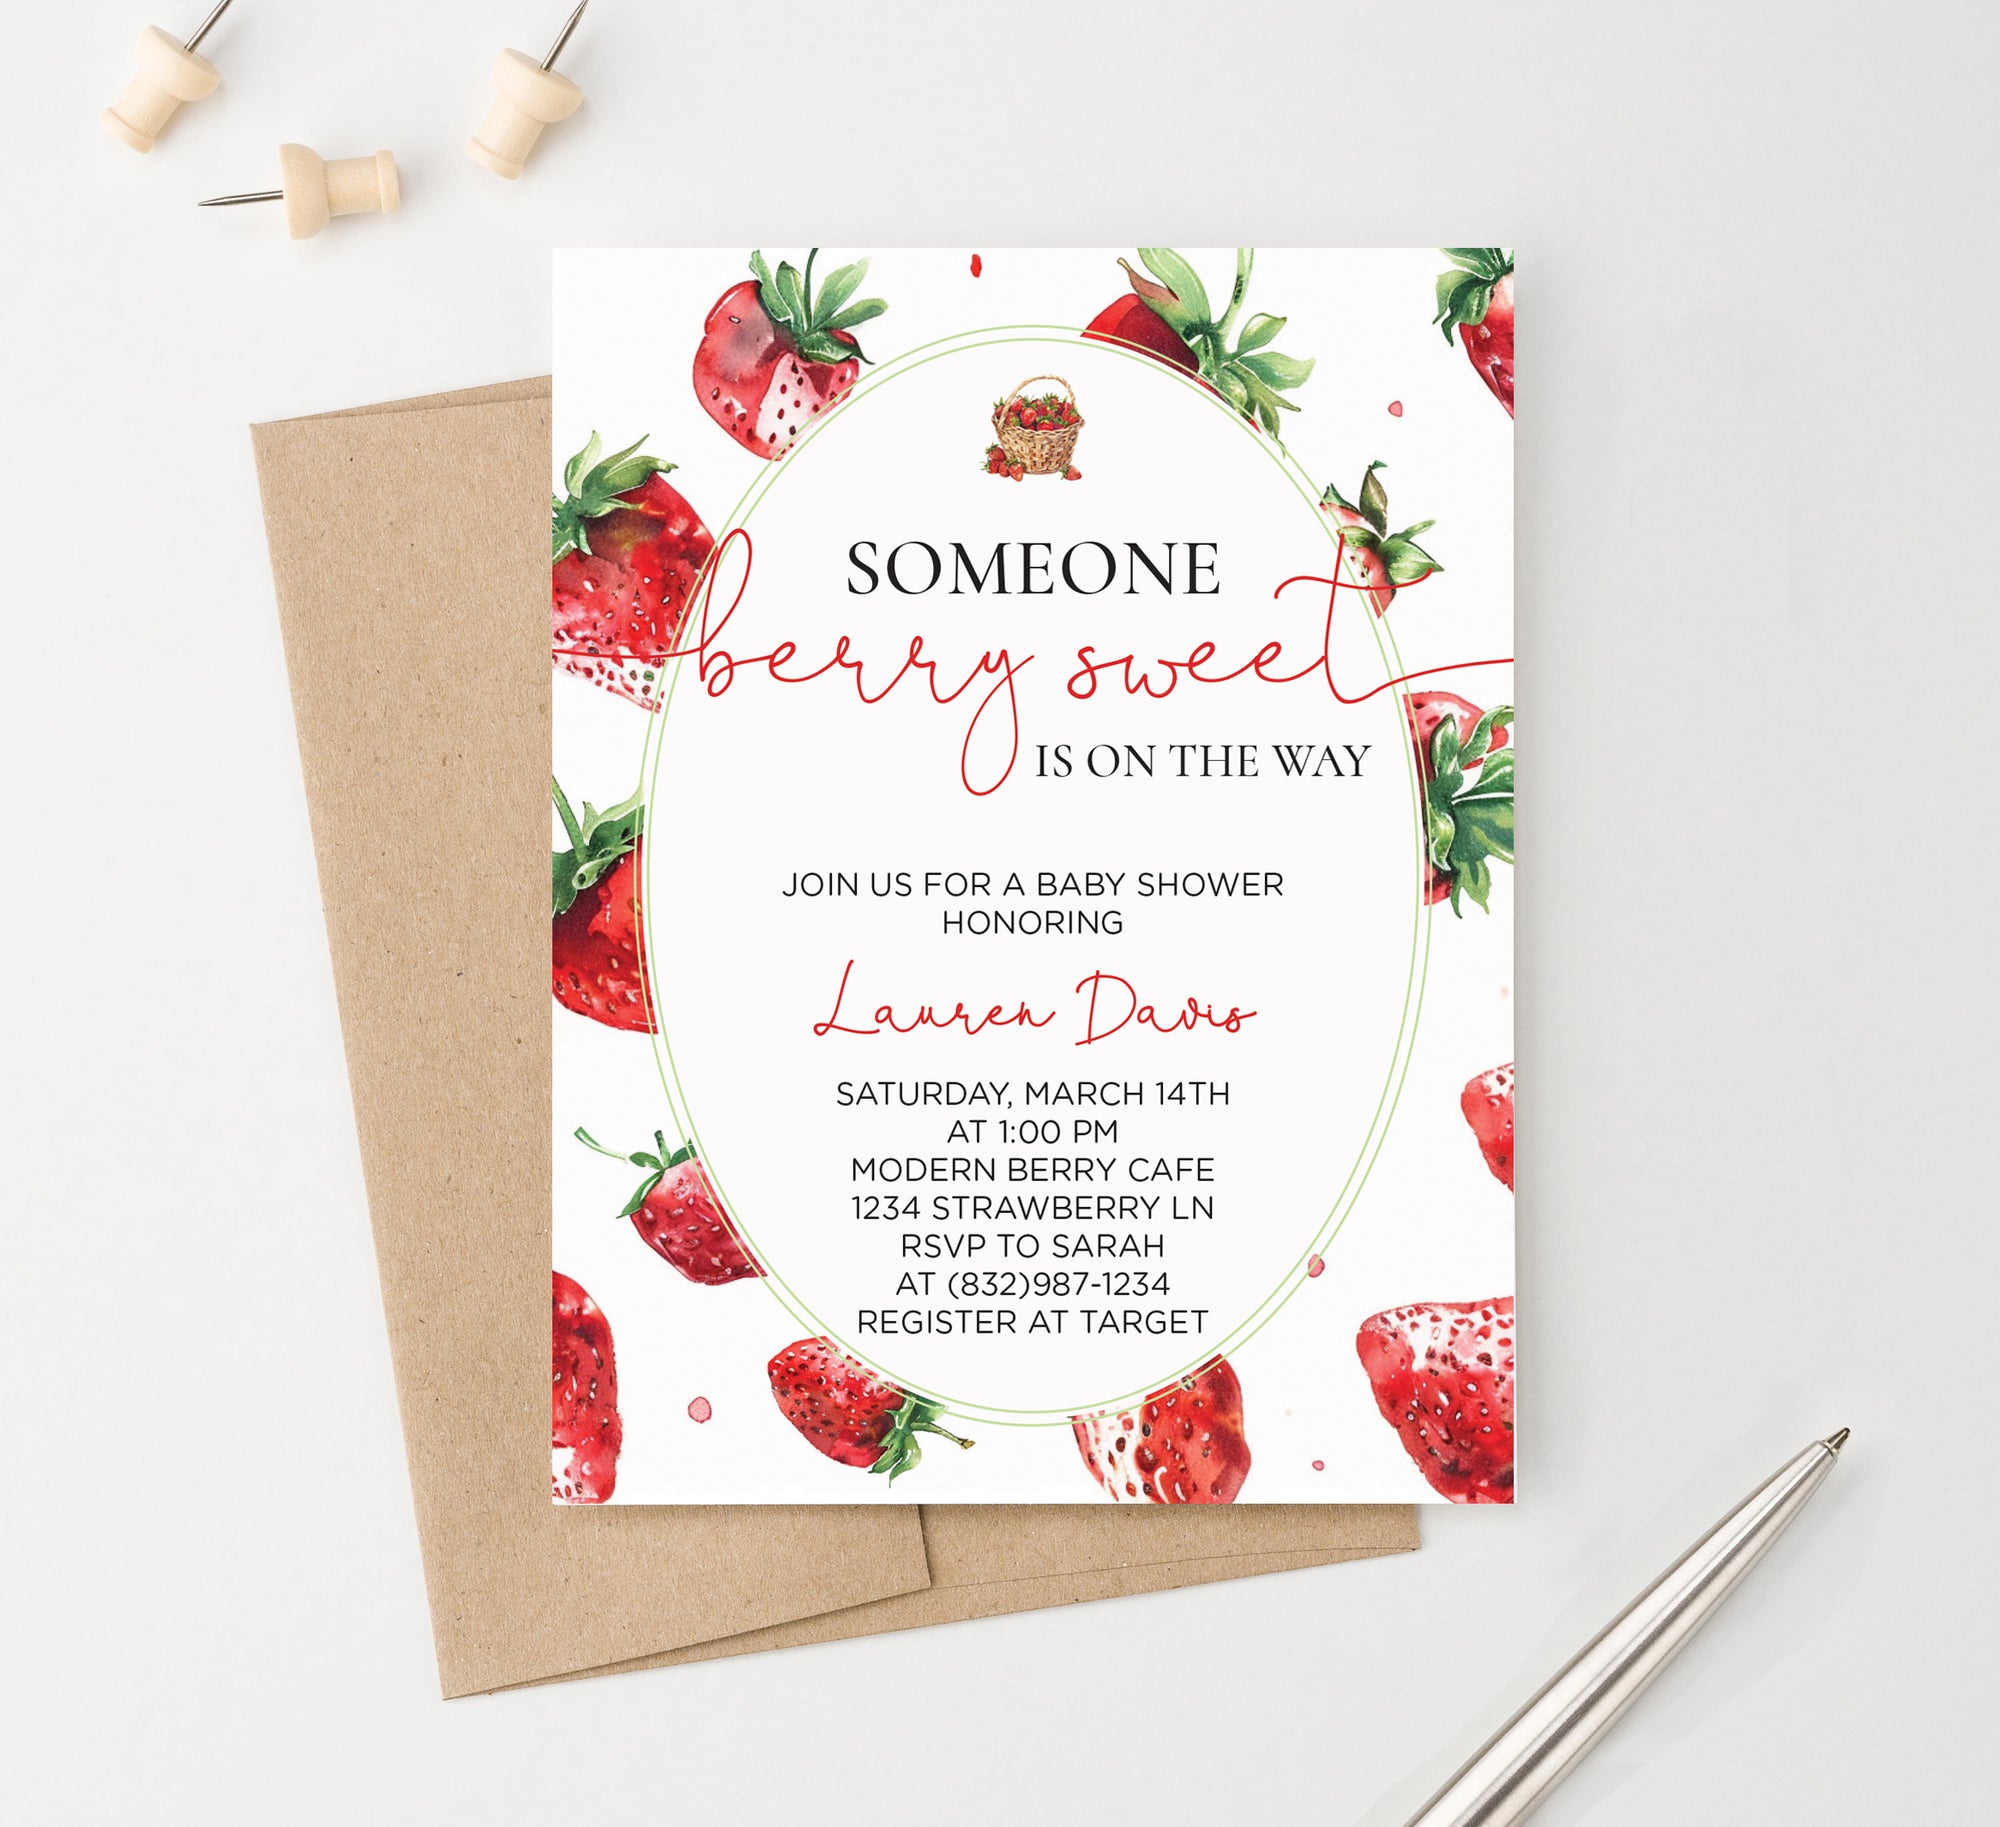 Someone Berry Sweet Is On The Way Baby Shower Invite Personalized